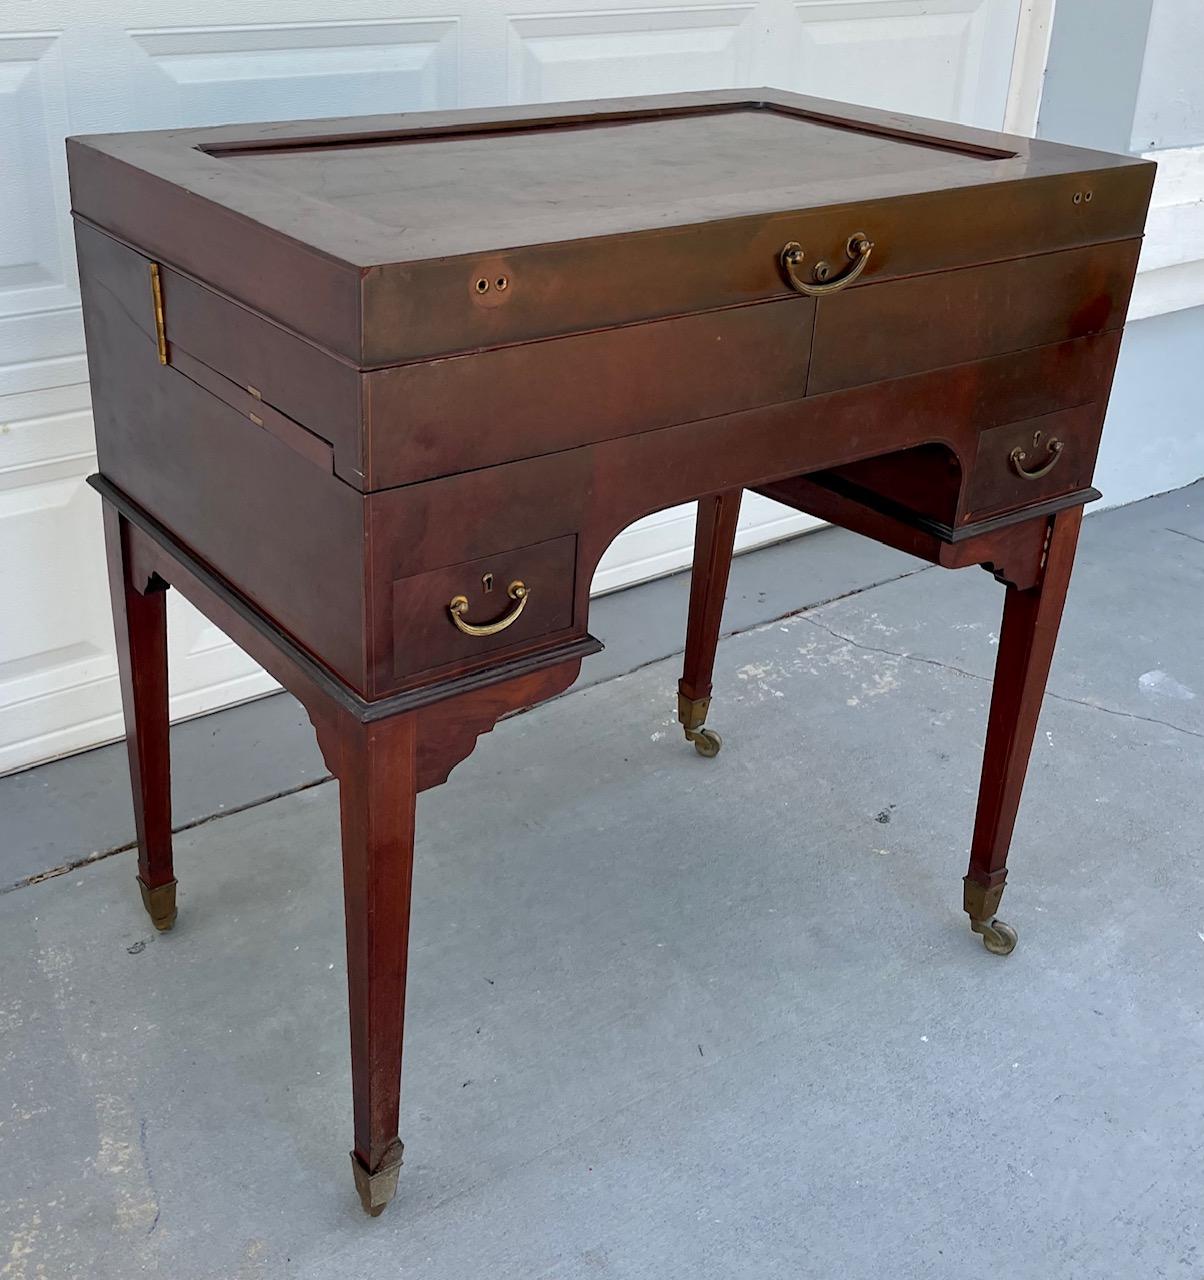 English Mahogany Beau Brummell Gentleman dressing desk. Aristocratic Pedigree. 

Outstanding example of a rare mechanical piece of furniture of museum quality. The luxurious polished Mahogany desk is raised on four square tapered legs on brass